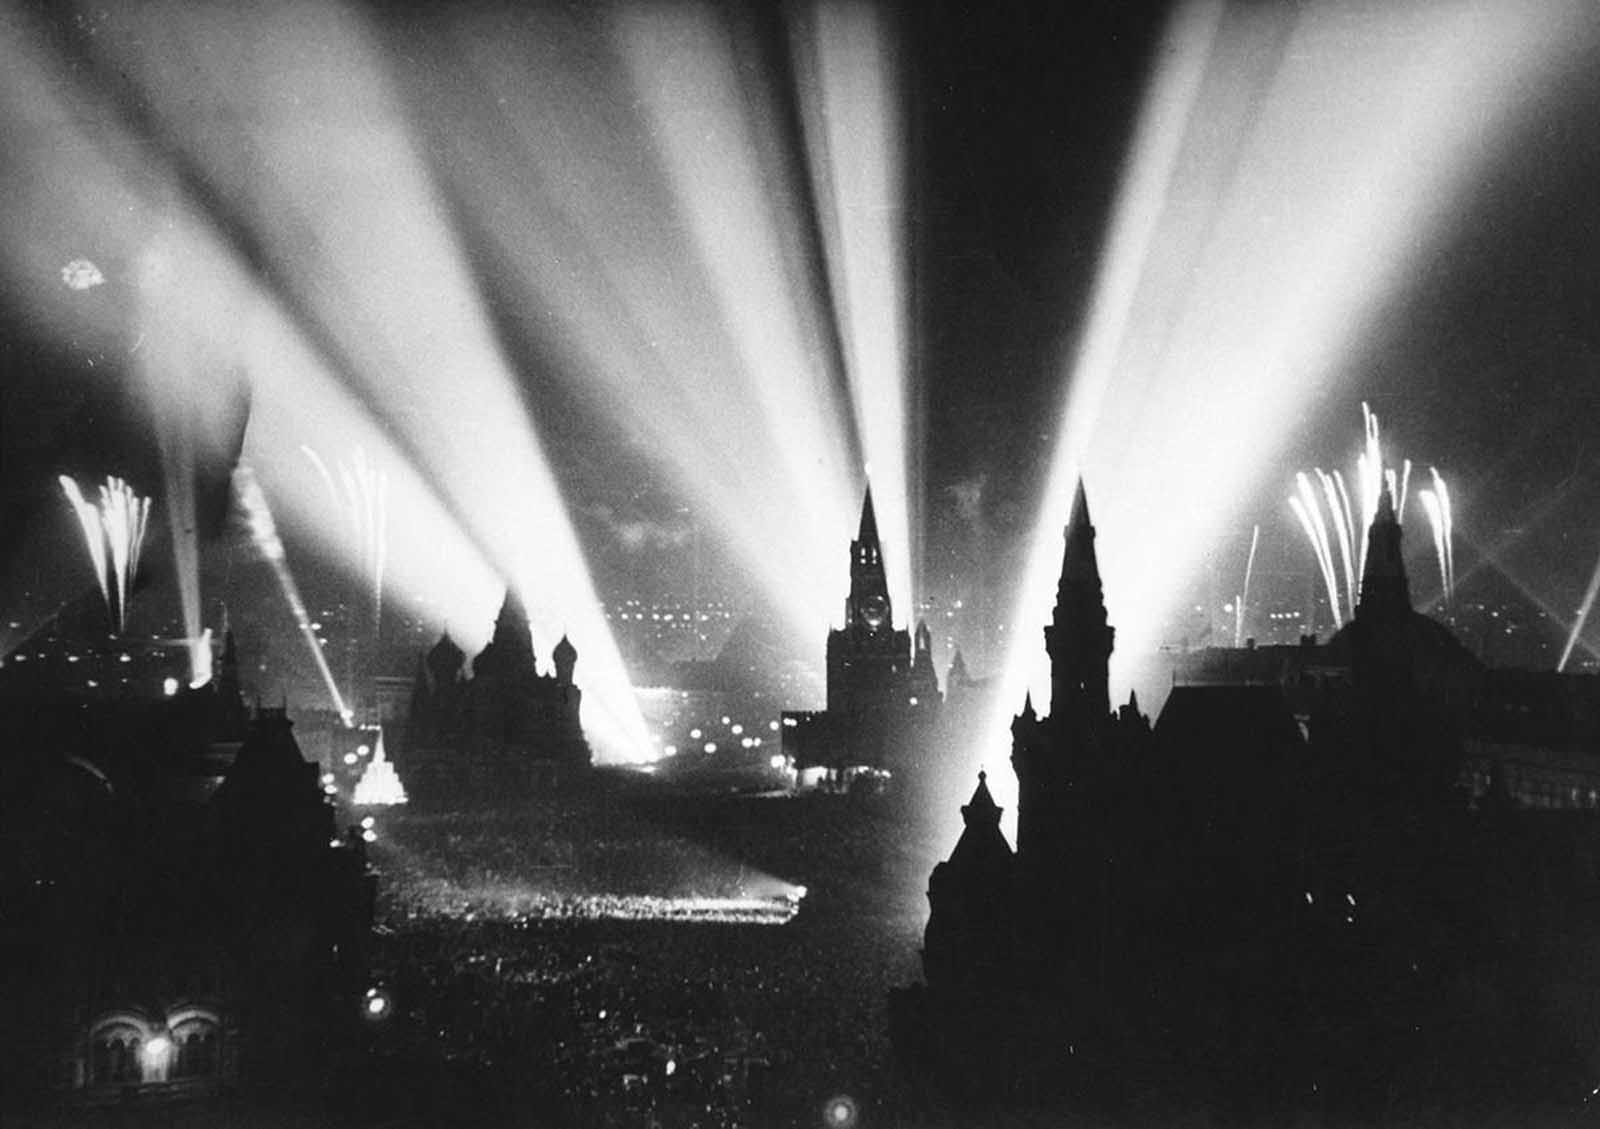 Celebration of Victory in Moscow’s Red Square, in the Soviet Union. Fireworks began on May 9, 1945, followed by bursts of gunfire and a sky illuminated by searchlights.